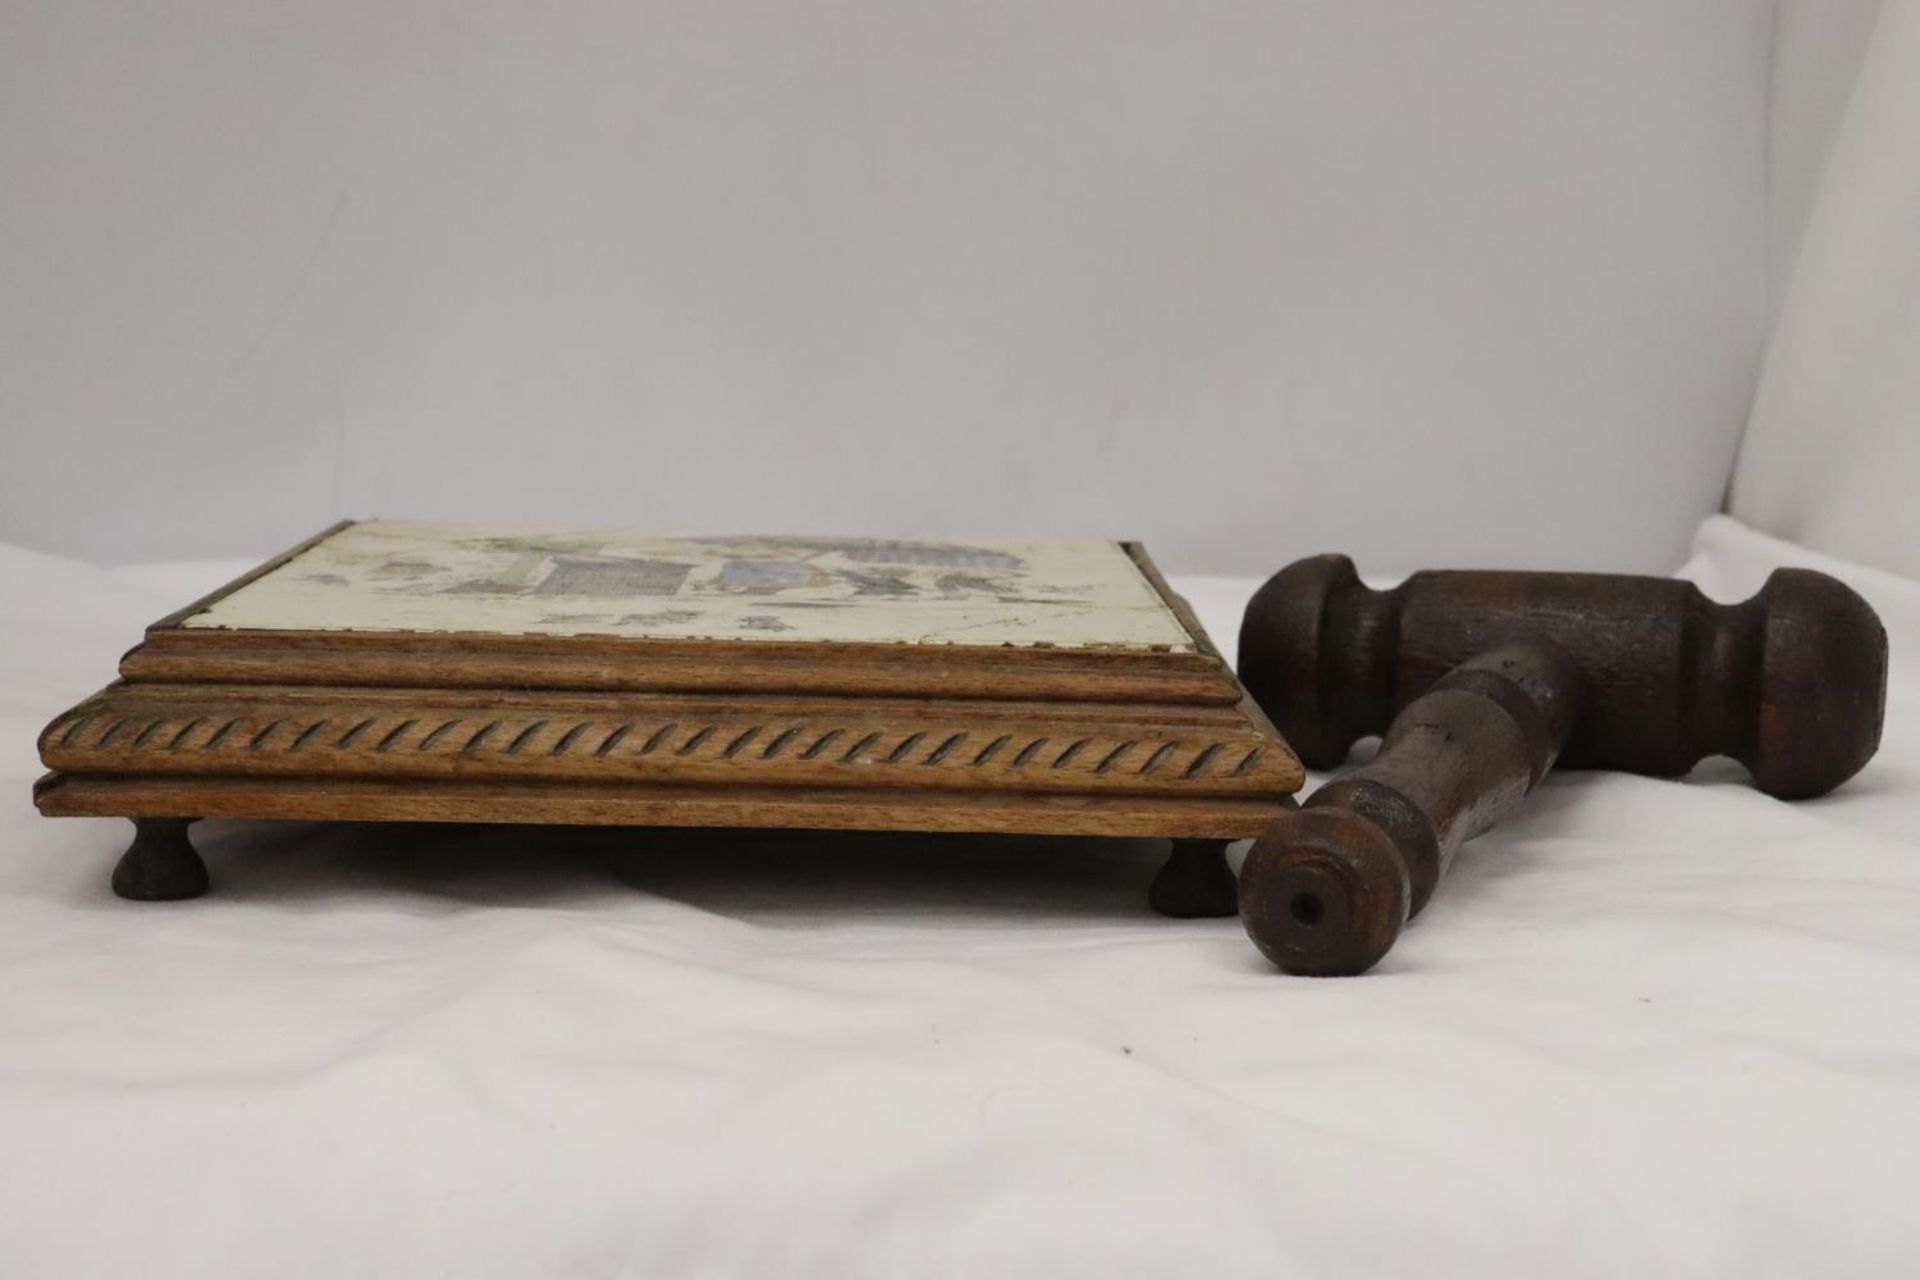 A LARGE AUCTIONEERS GAVEL WITH A TILED PLINTH - Image 2 of 6